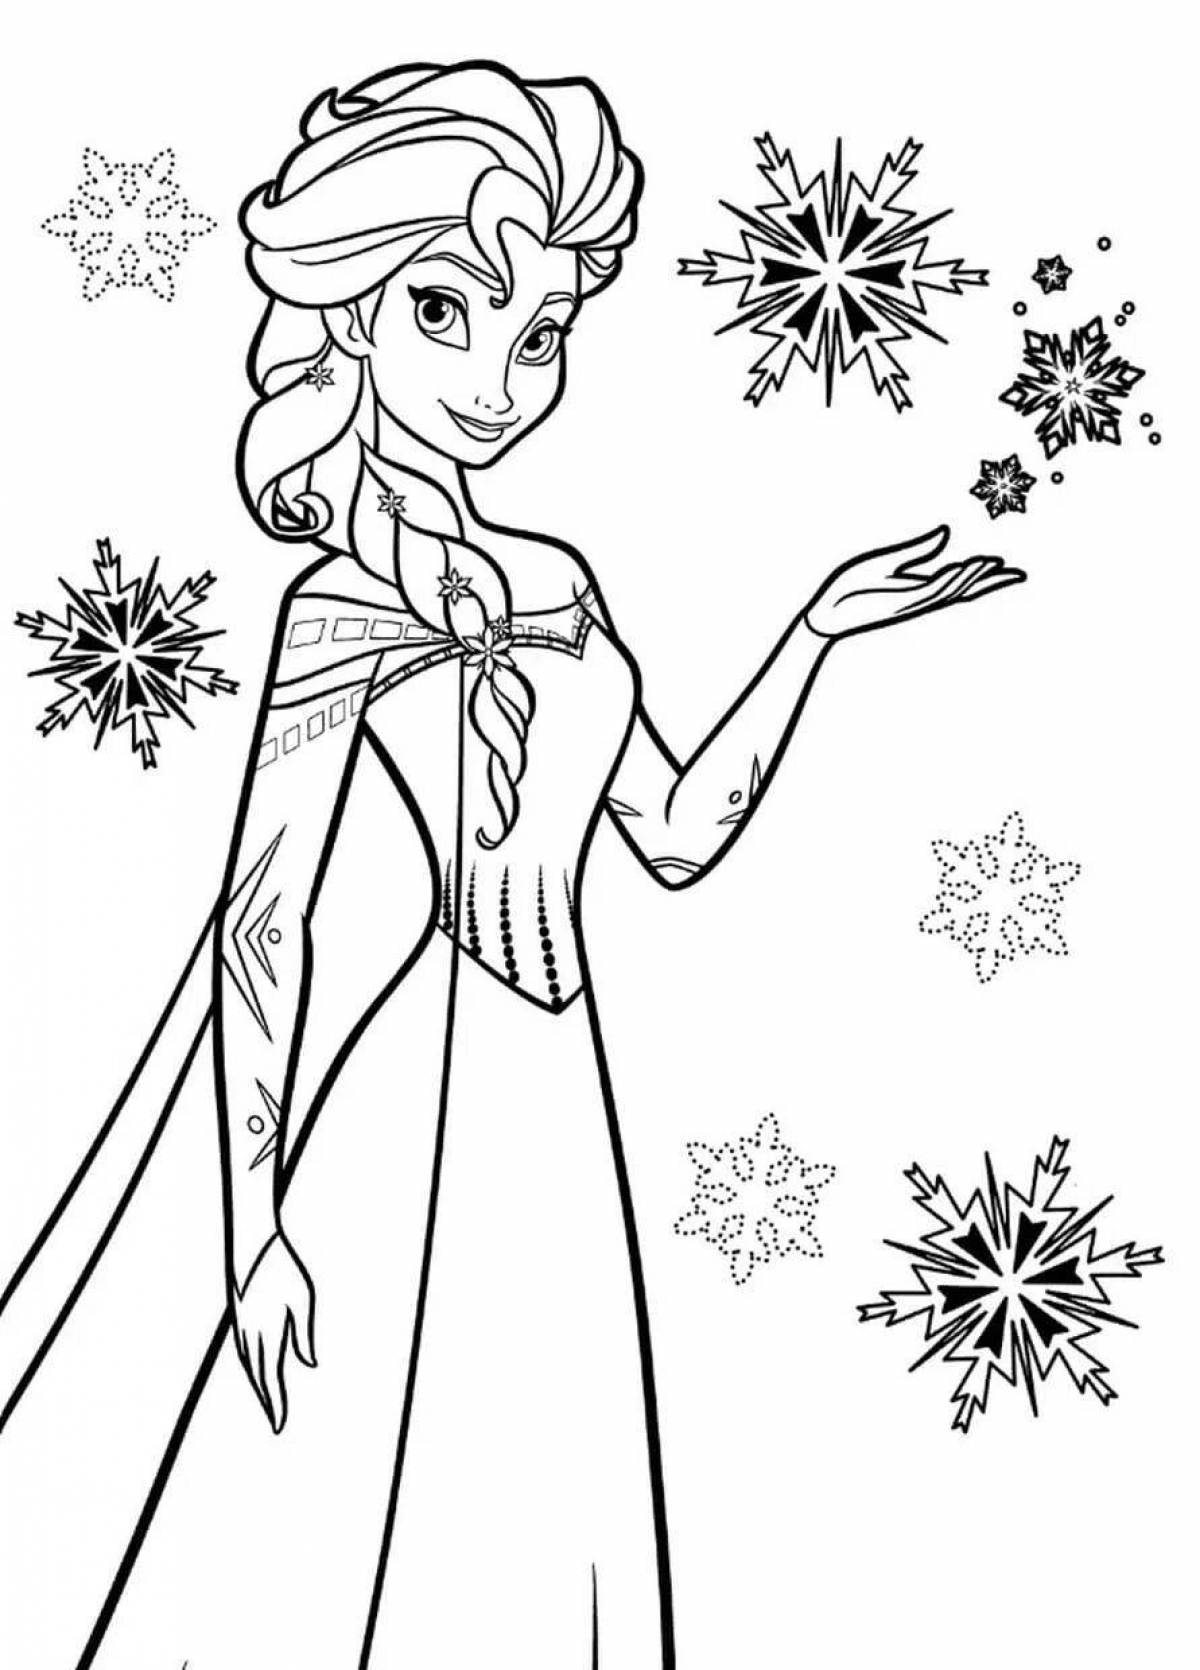 Exalted elsa and anna coloring book